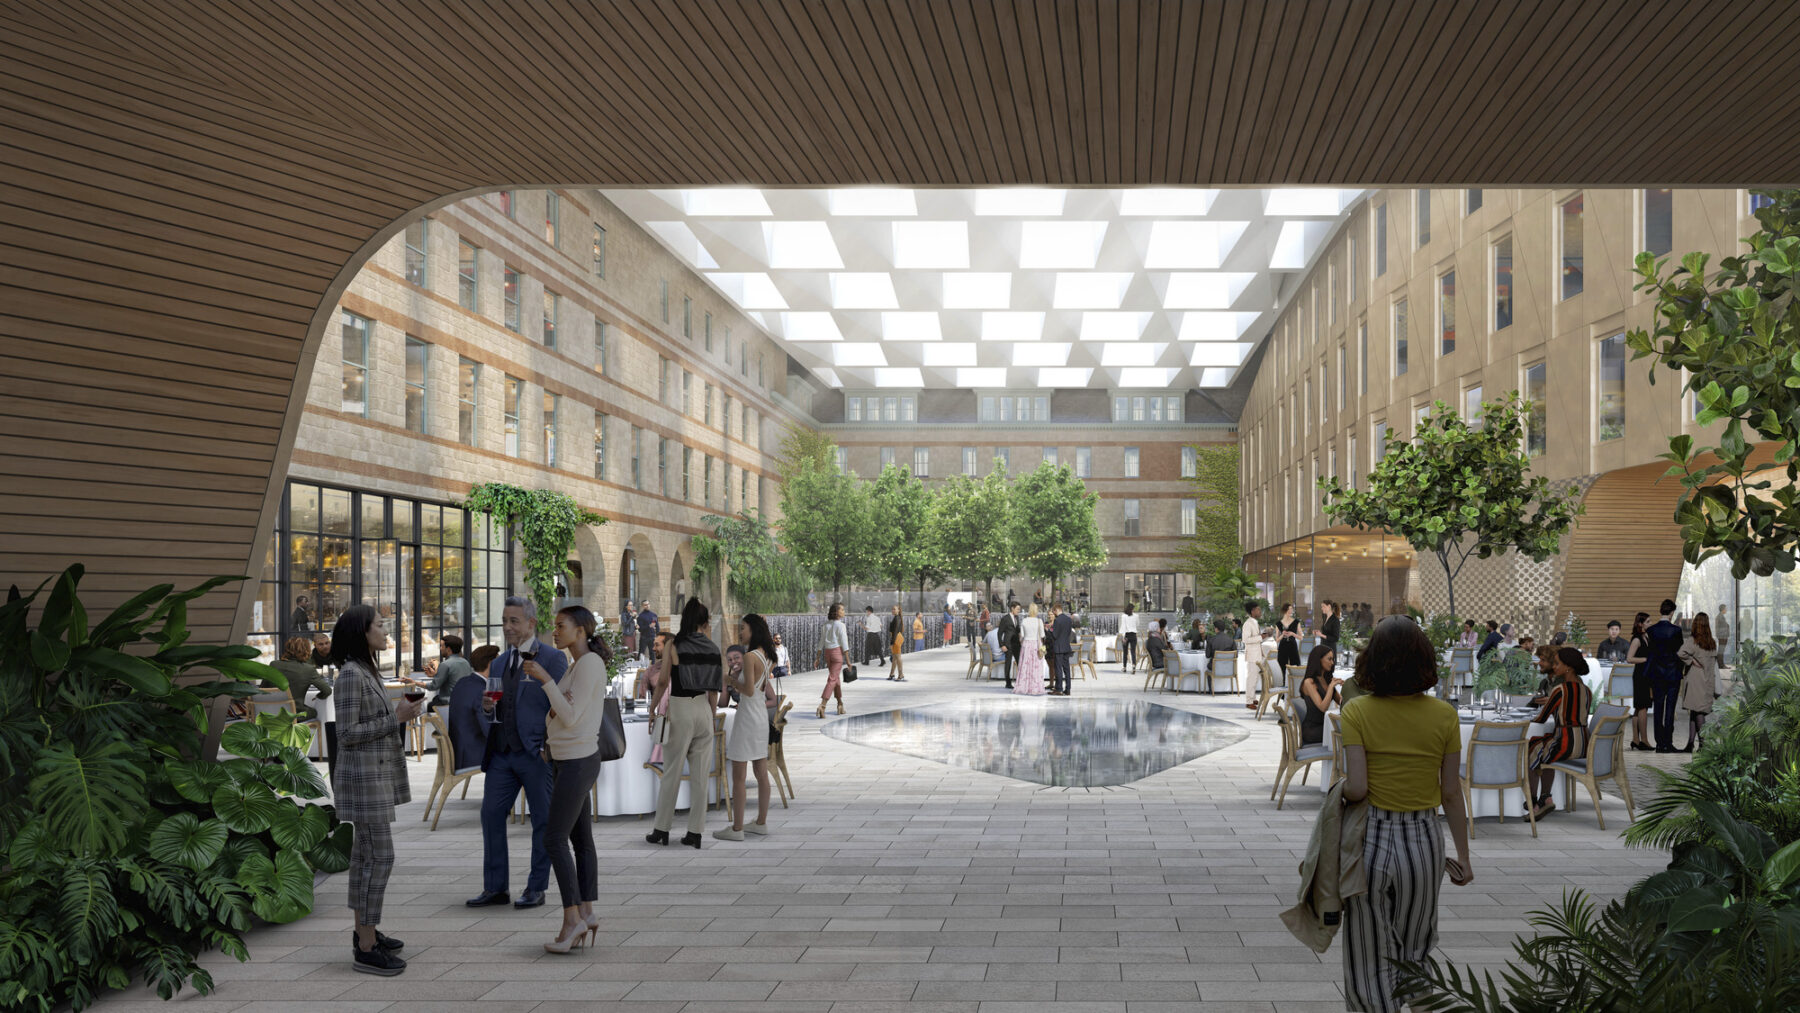 Rendering of the interior winter garden space inside the historic castle building